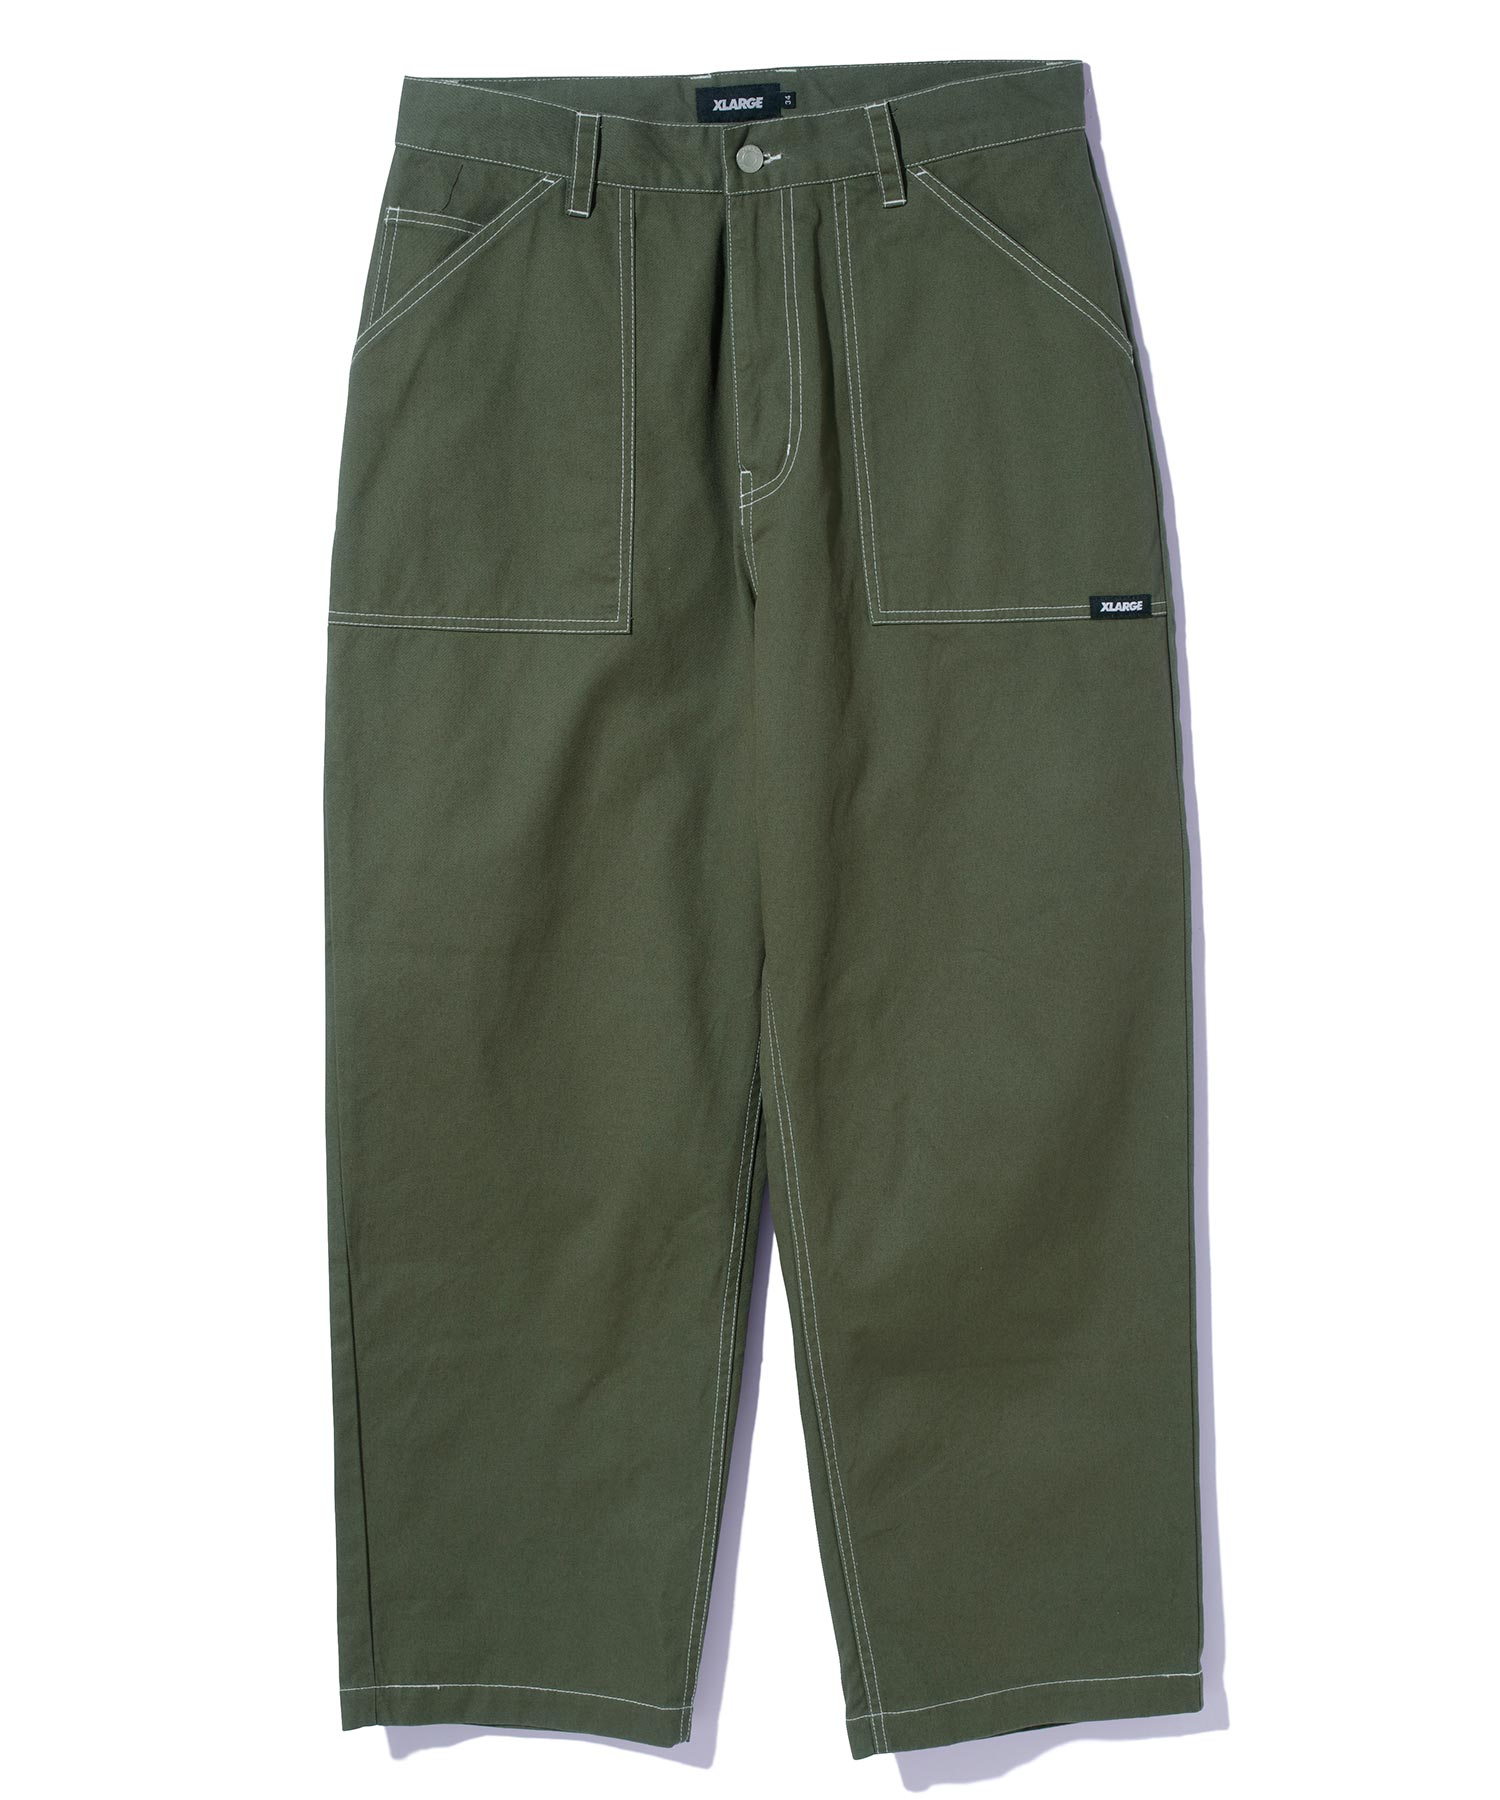 WashedCotton BakerPants Pickle Green Loose Casual Workwear Baker